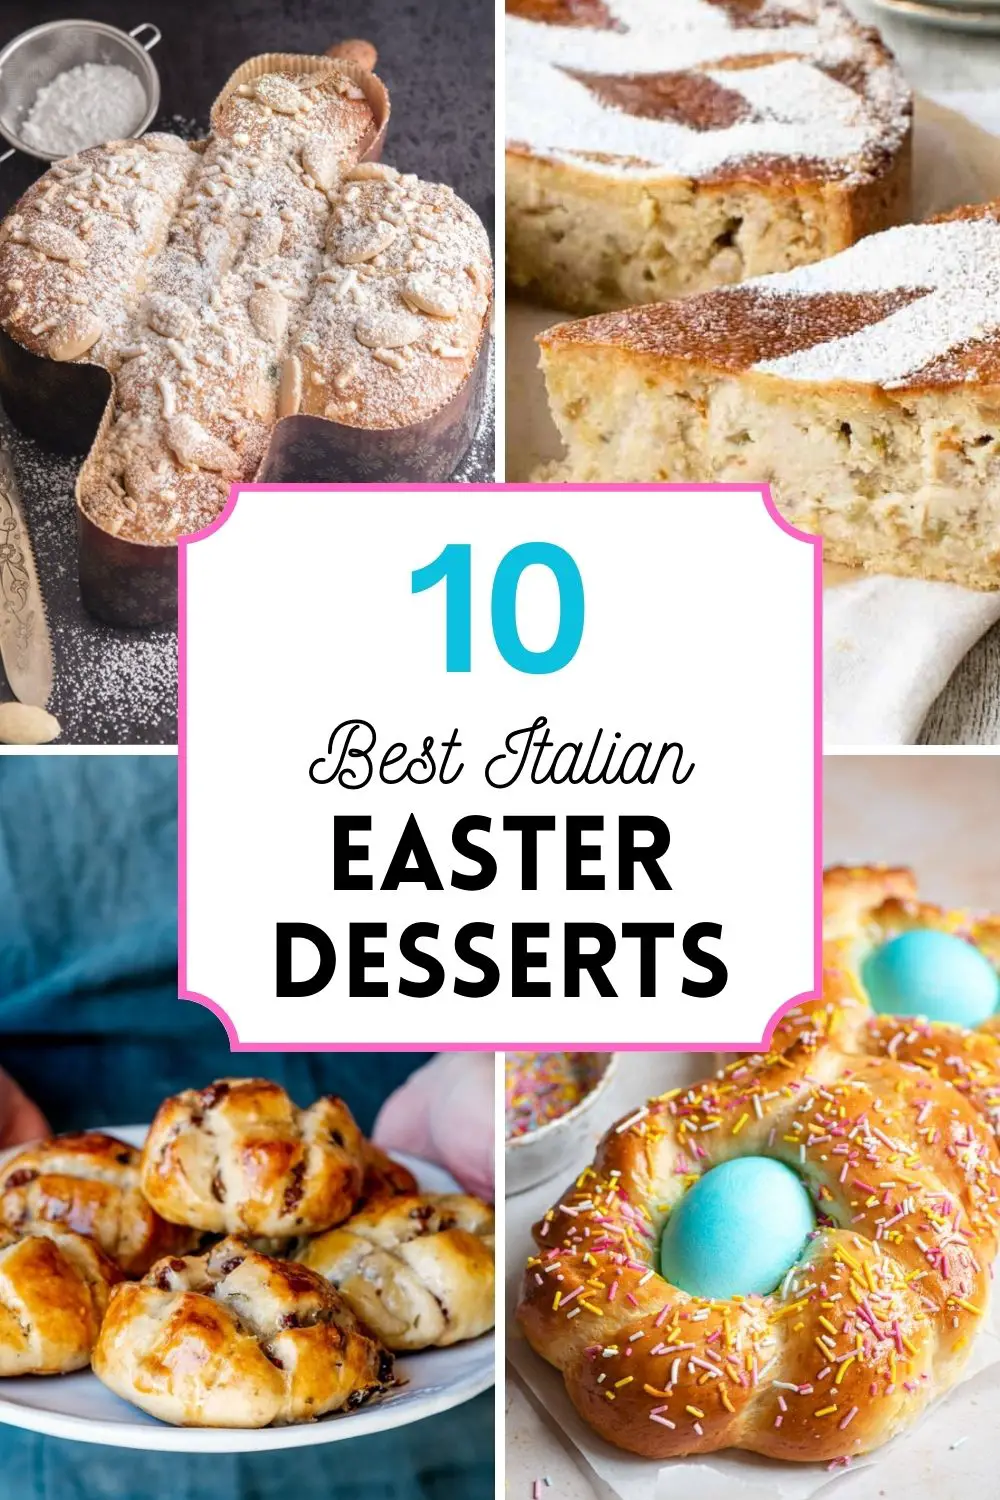 10 Best Italian Easter Desserts - Cooking My Dreams